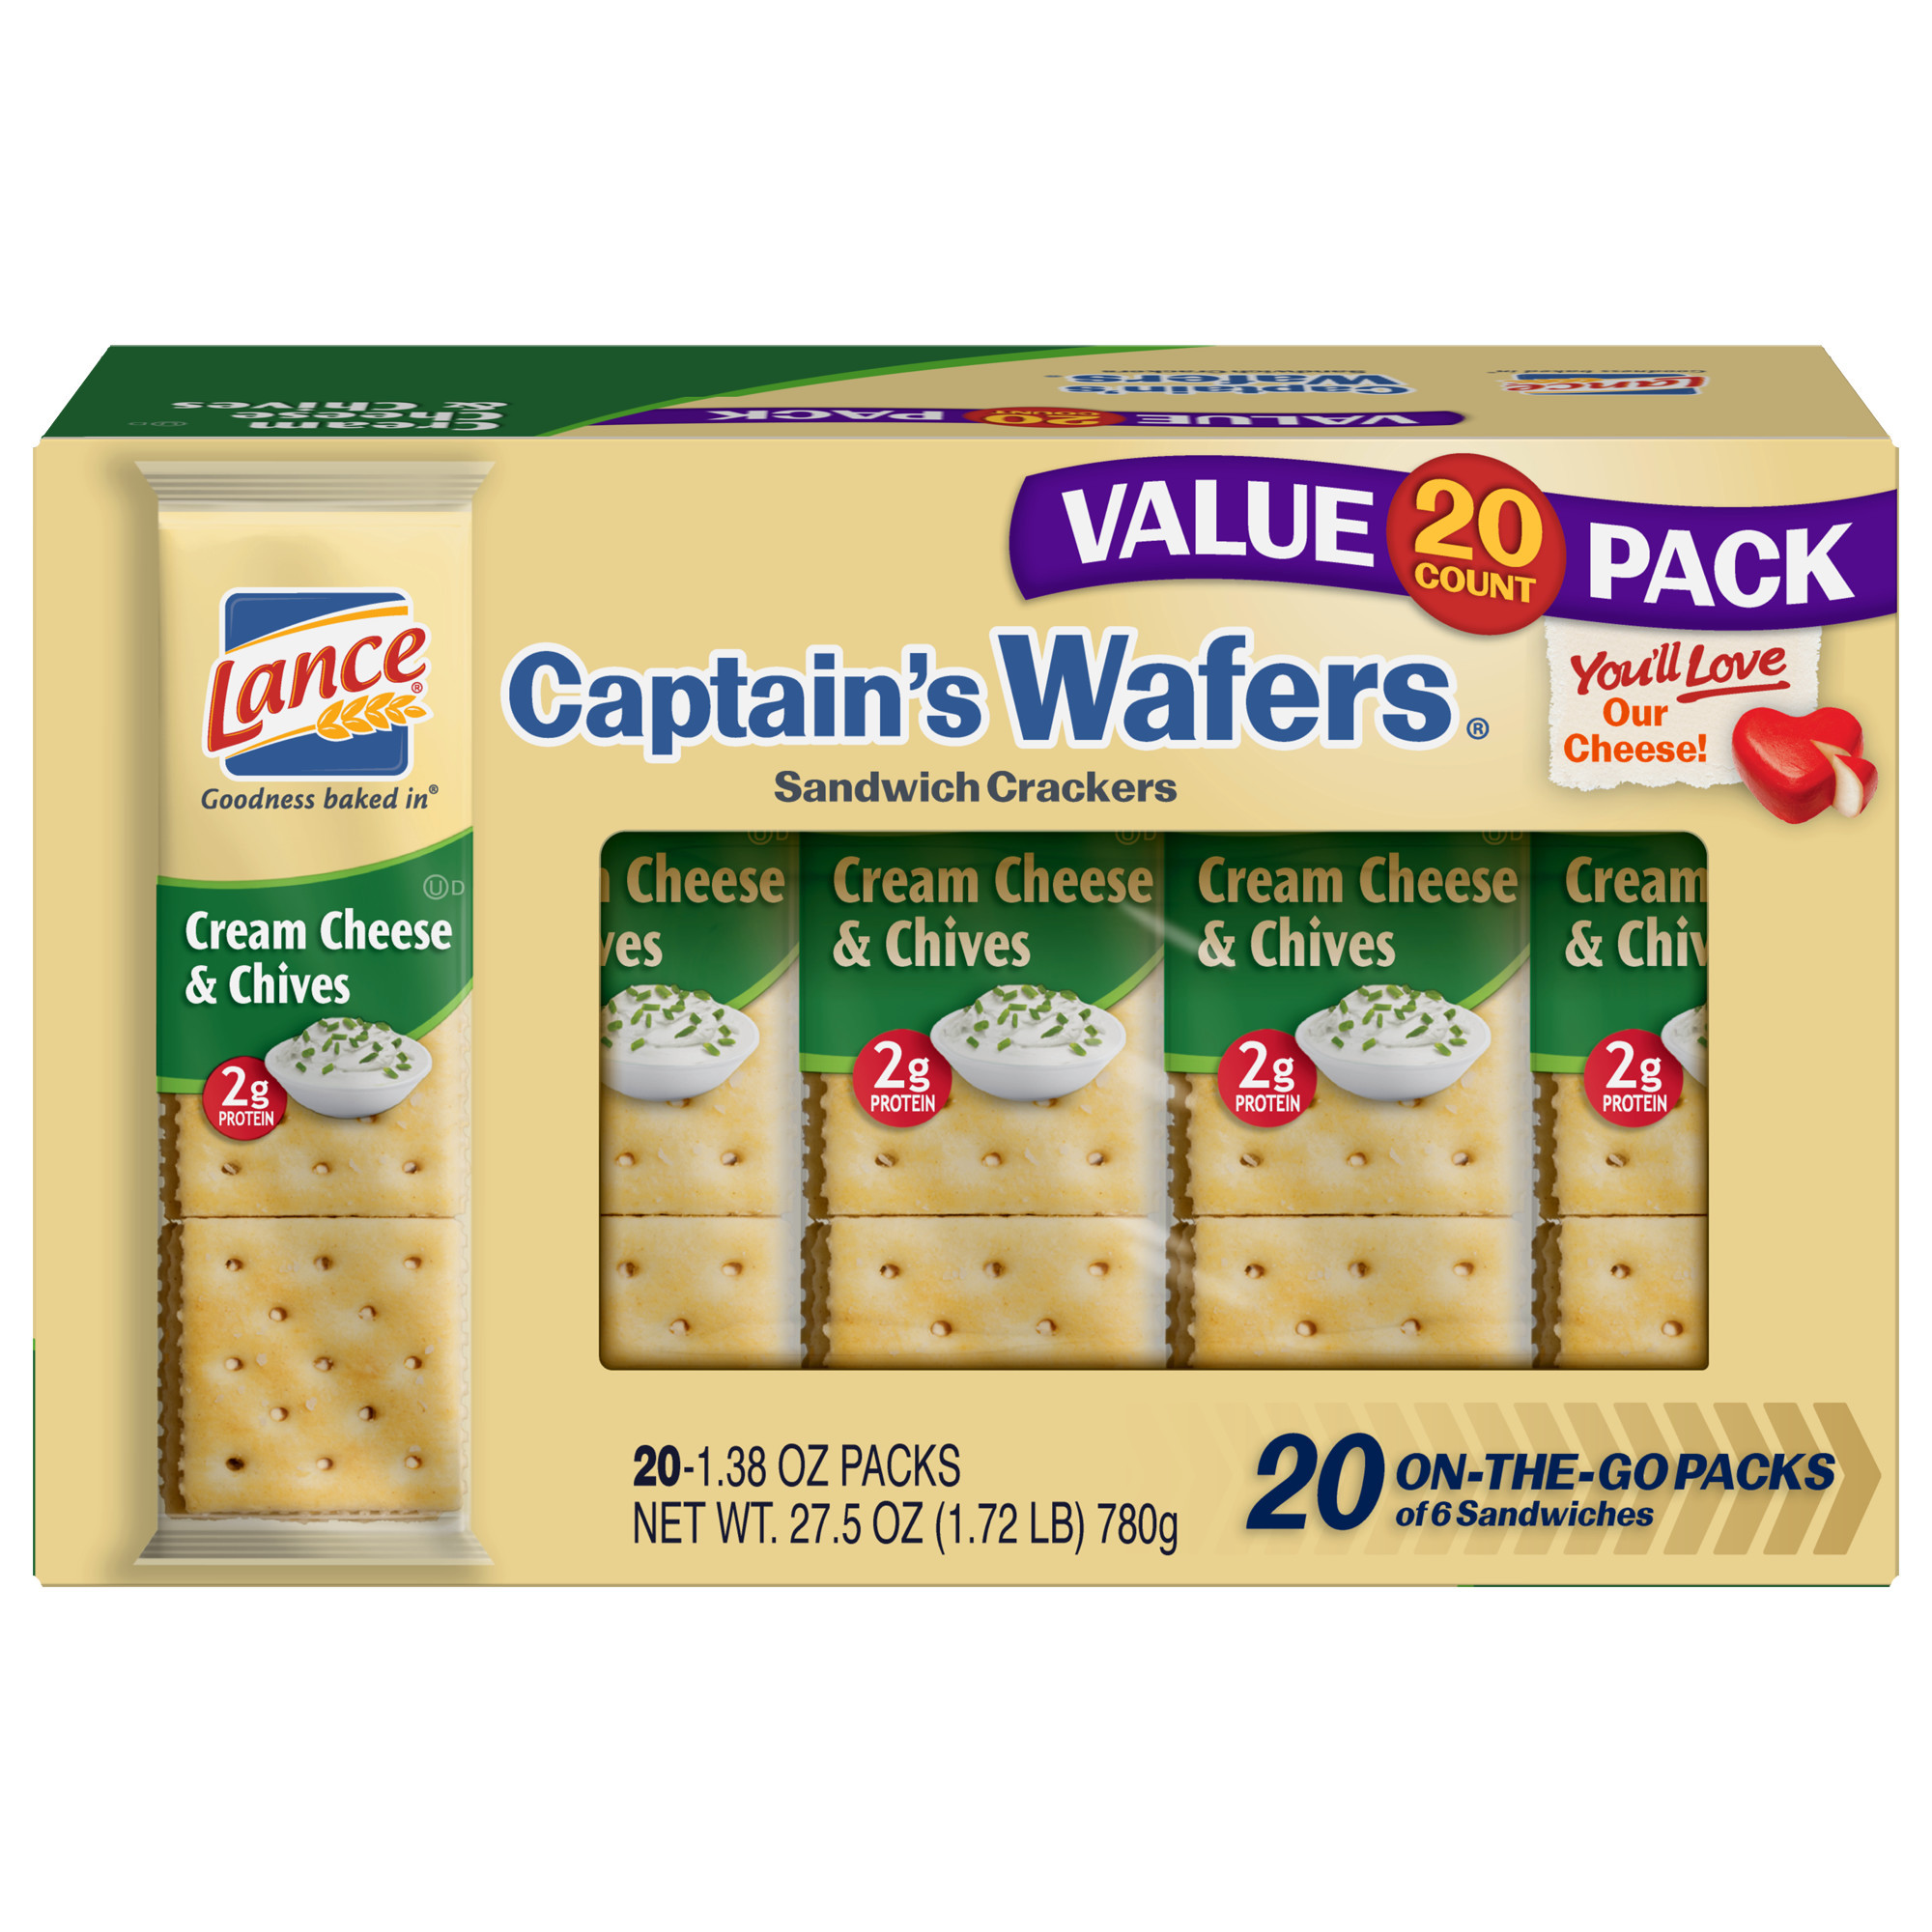 Lance Sandwich Crackers
 Lance Captain s Wafers Cream Cheese & Chives Sandwich